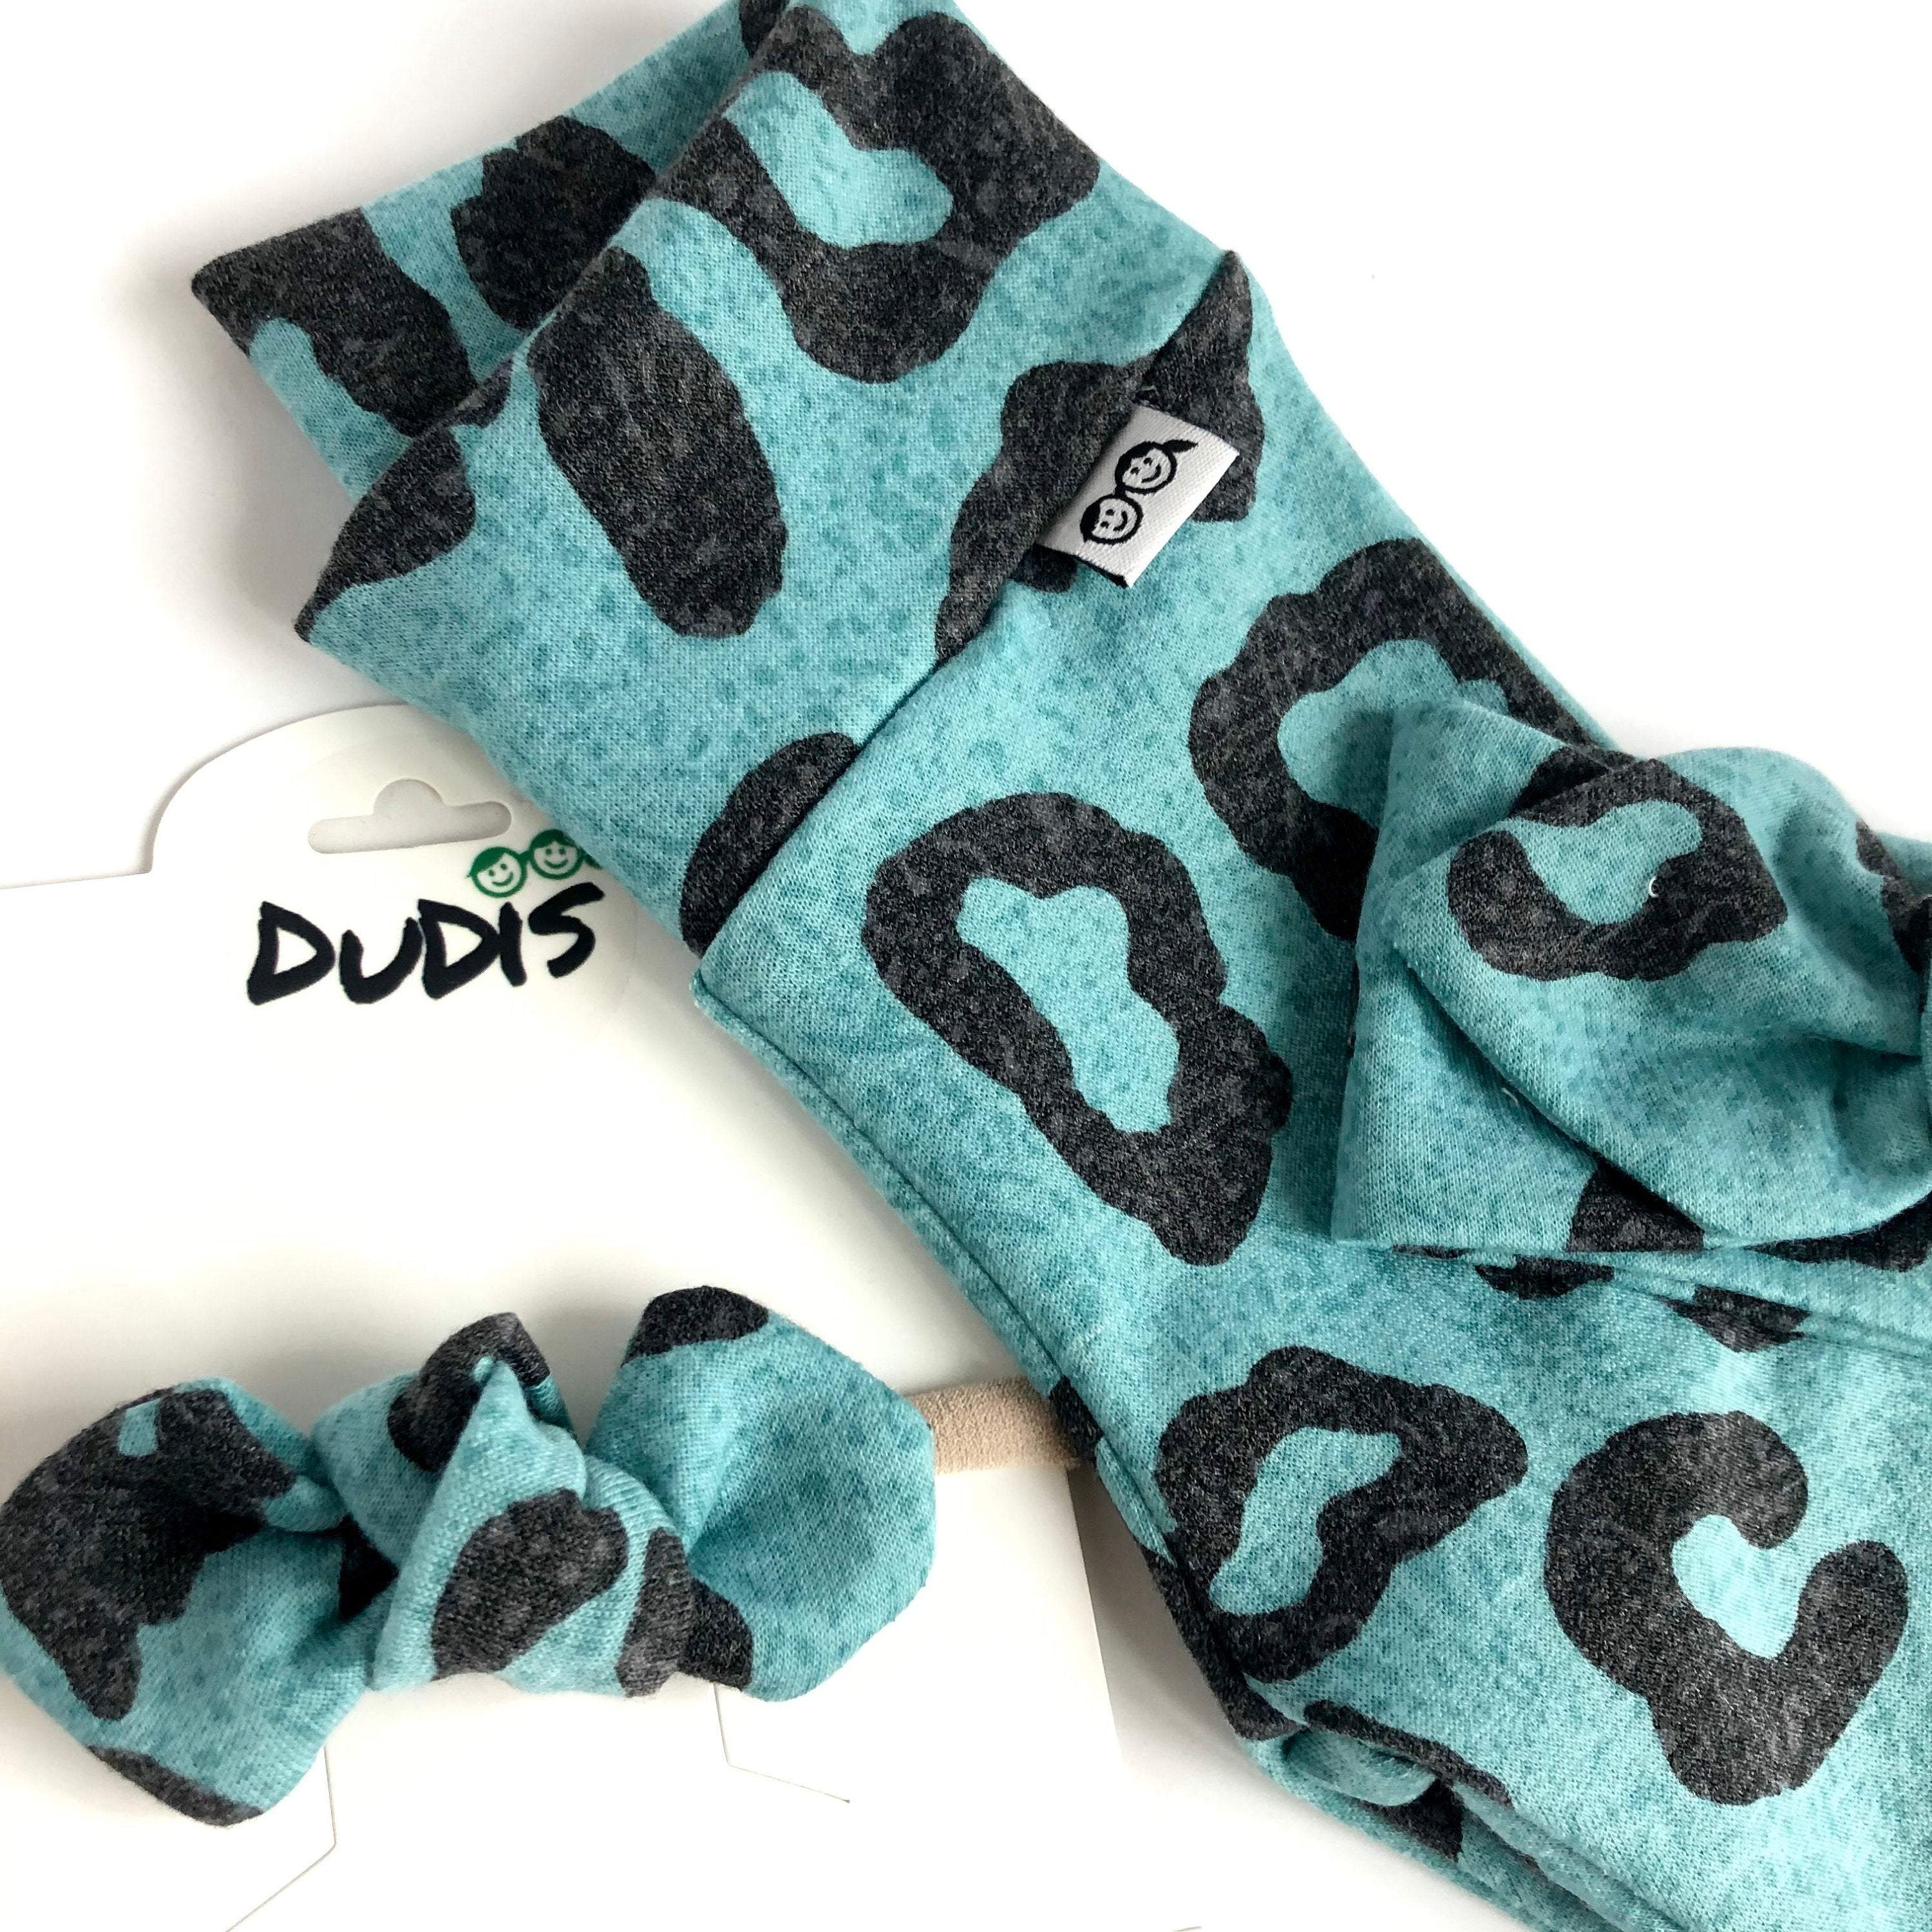 Teal Leopard Leggings and/or Headbands